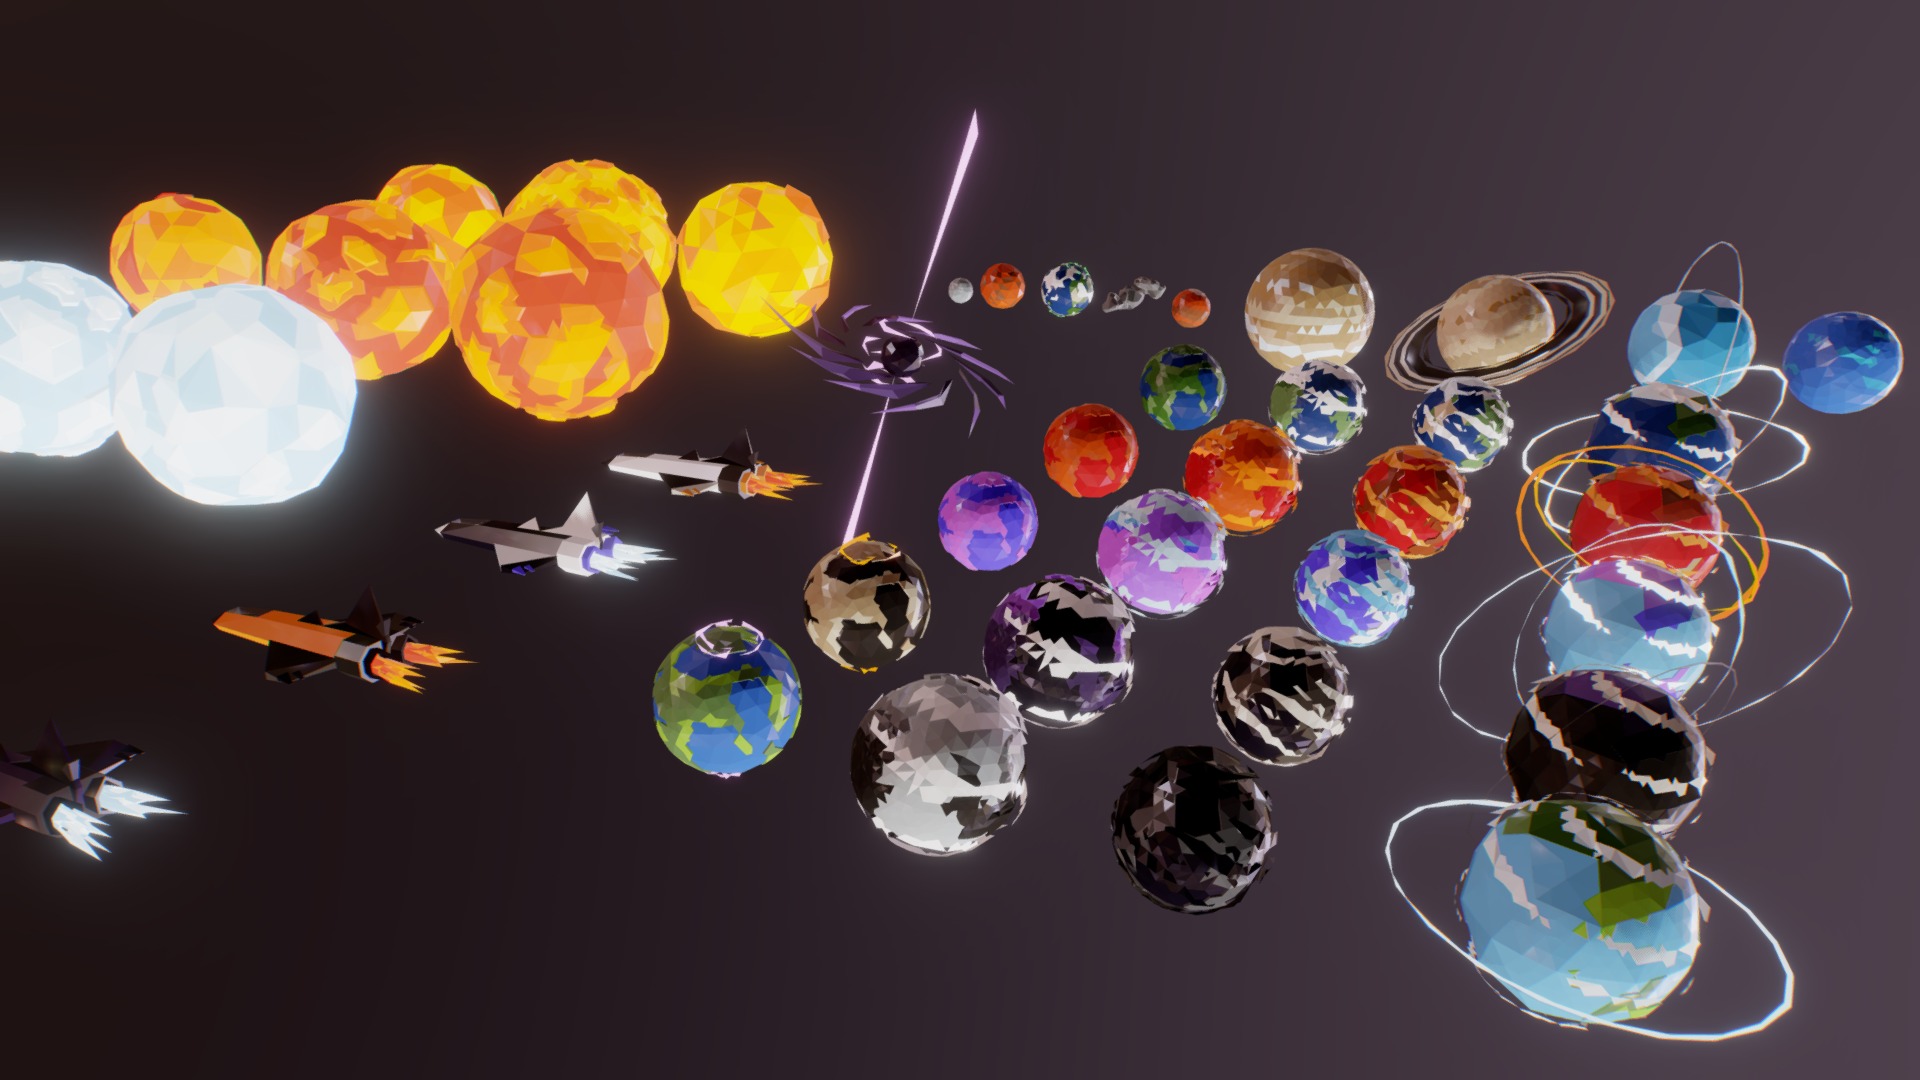 3D model Lowpoly Space Pack - This is a 3D model of the Lowpoly Space Pack. The 3D model is about a group of planets and stars.